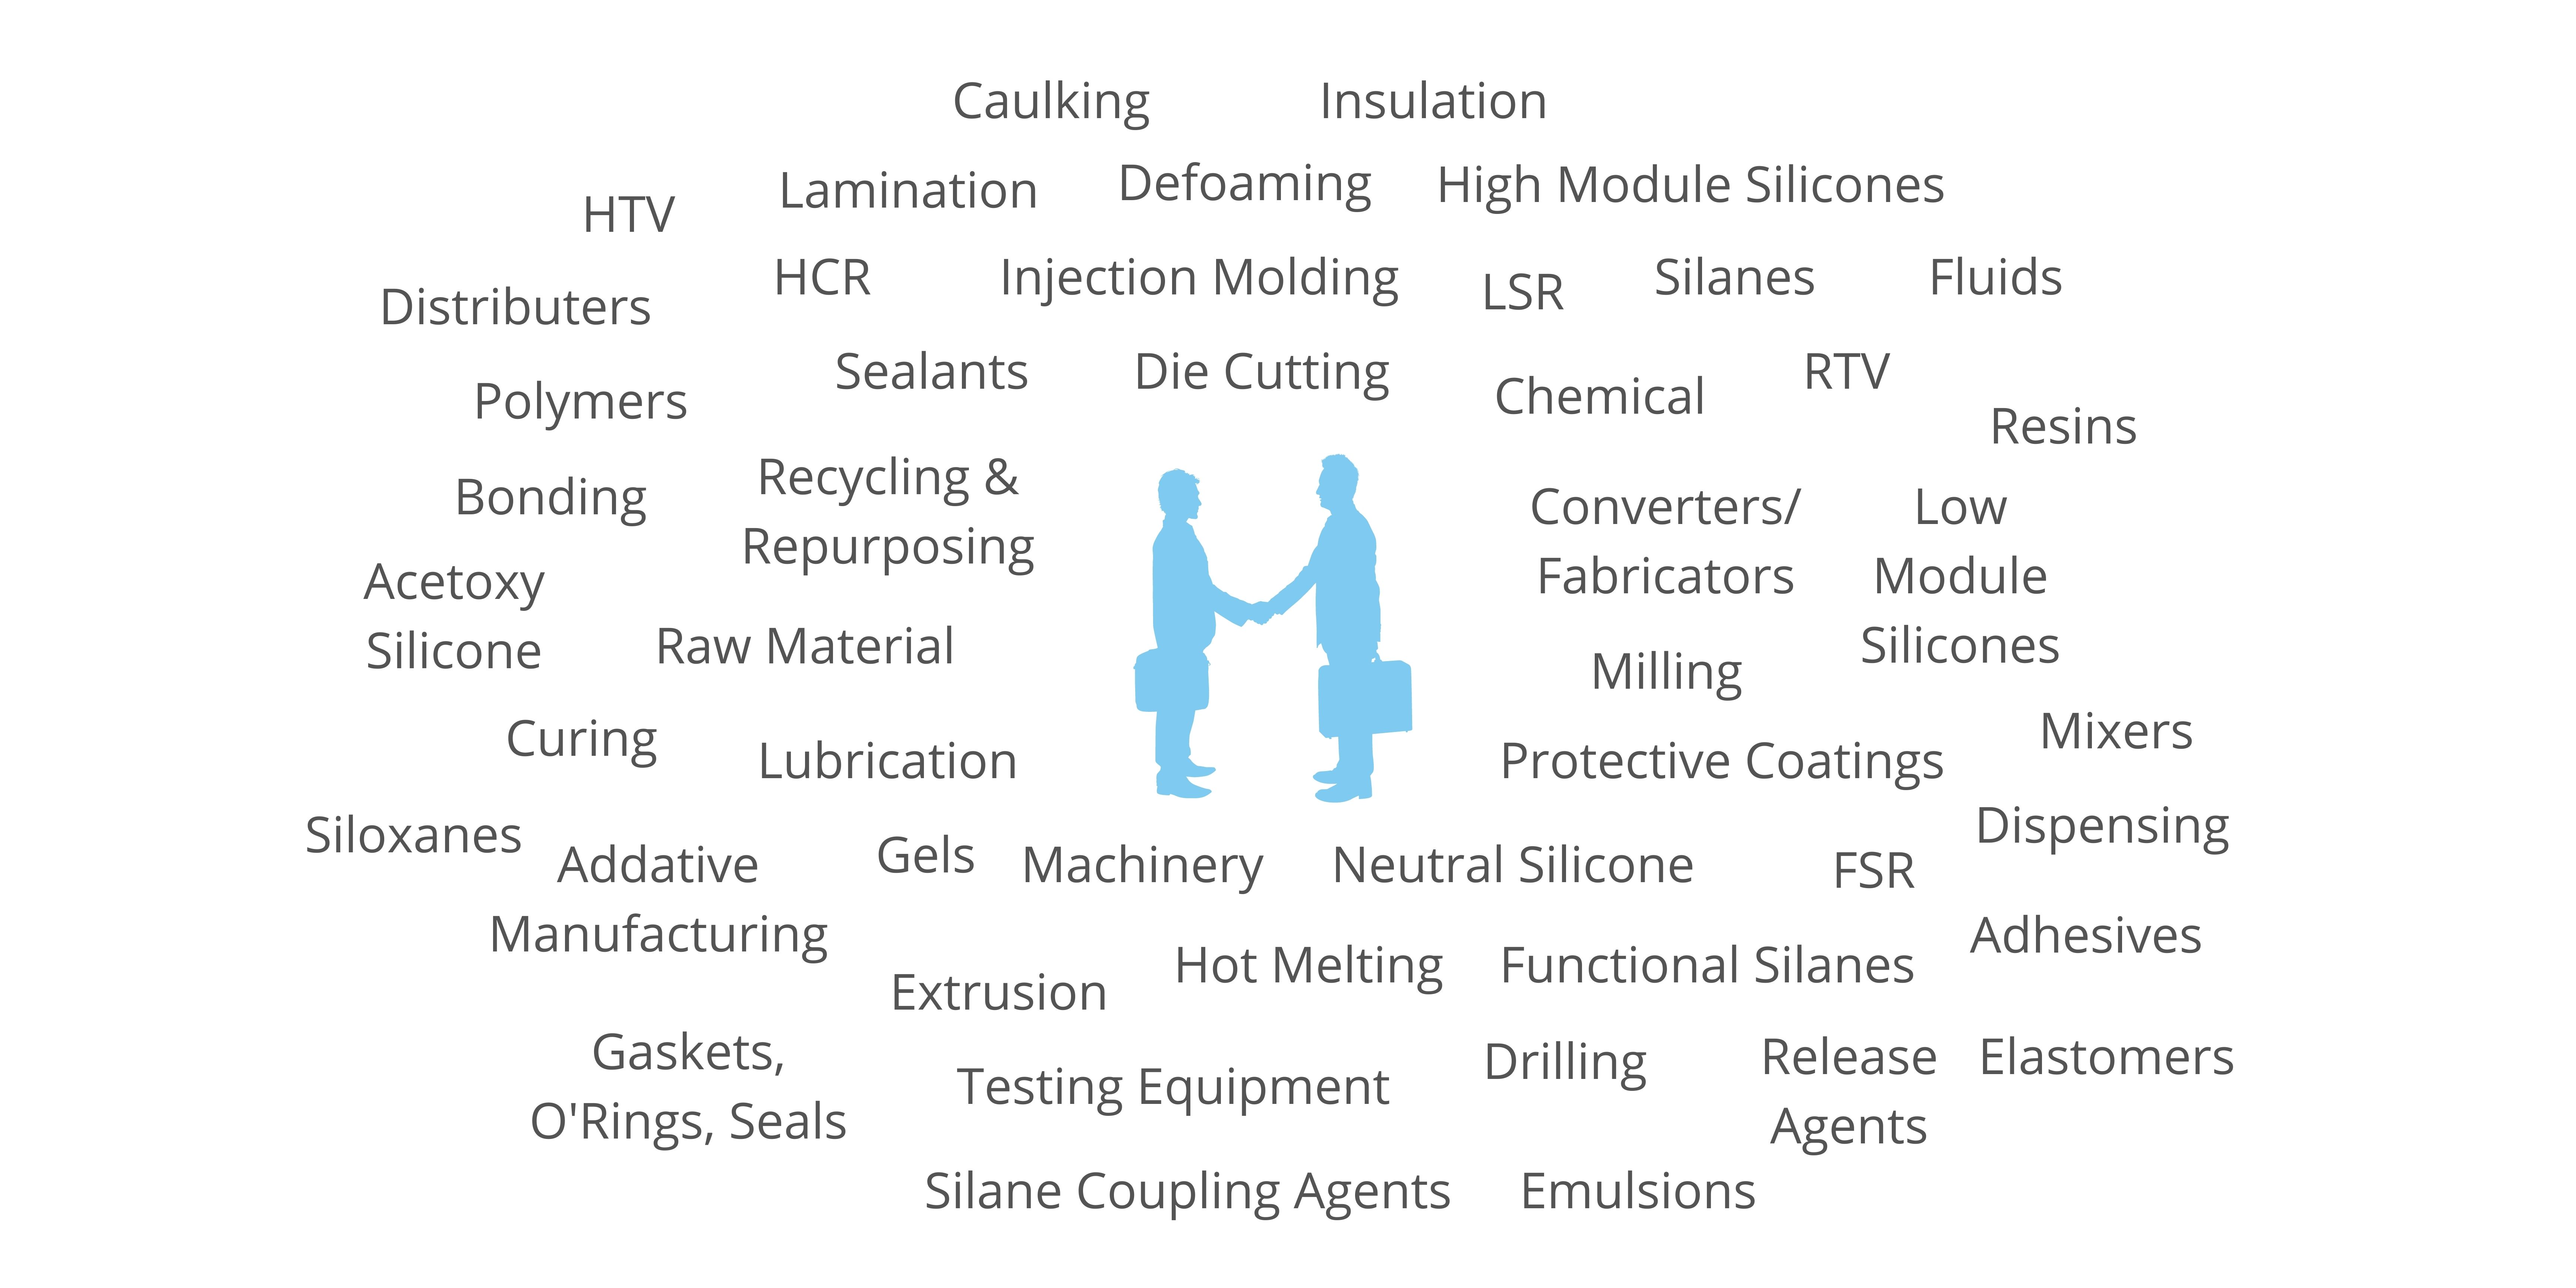 silicones, silicone, trade show, elastomers, fluids, resins, gels, silanes, silicon, gaskets, polymers, injection molding, extrusions, sealants, adhesives, lamination, release agent, automotive, aerospace, medical, construction, electronics, mass transit, hvac, converters, testing equipment, hot melting, fsr, hcr, emulsions, insulation, acetoxy silicone, chemical, raw material, high module silicones, lamination, lubrication, curing,